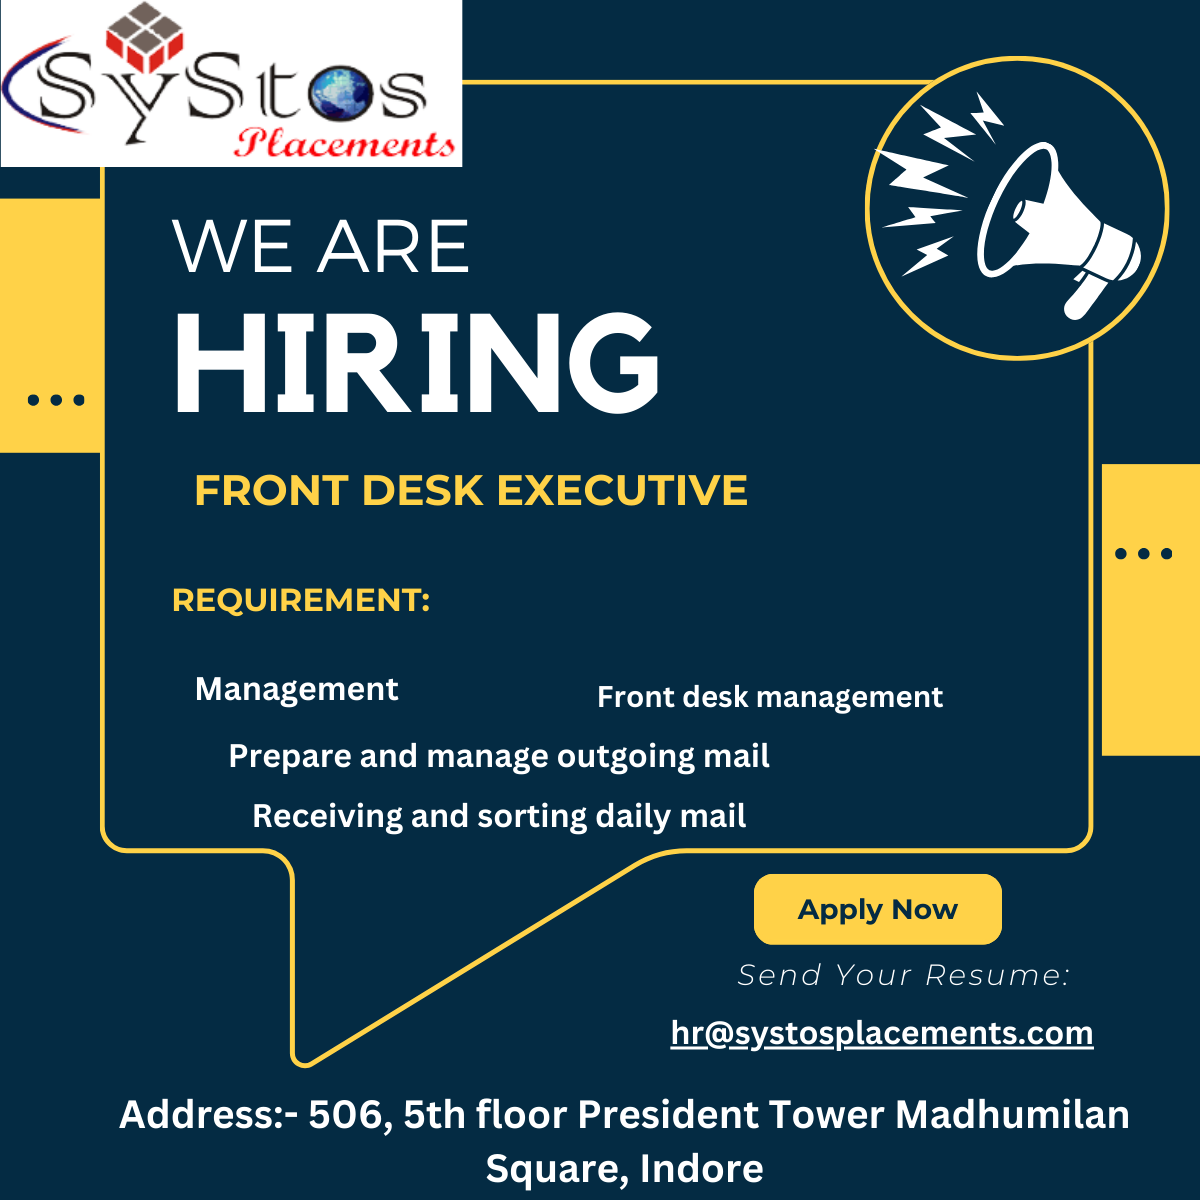 @.

ug

VSIE@s

Placements

LAVA =2N 24S

13) [e

FRONT DESK EXECUTIVE

  
     

 
 

REQUIREMENT:

   
   
  
 

Management Front desk management

 

Prepare and manage outgoing mail

Apply Now

Send Your Resume

   
 

Receiving and sorting daily mail

hr@systosplacements.com

Address:- 506, 5th floor President Tower Madhumilan
Square, Indore